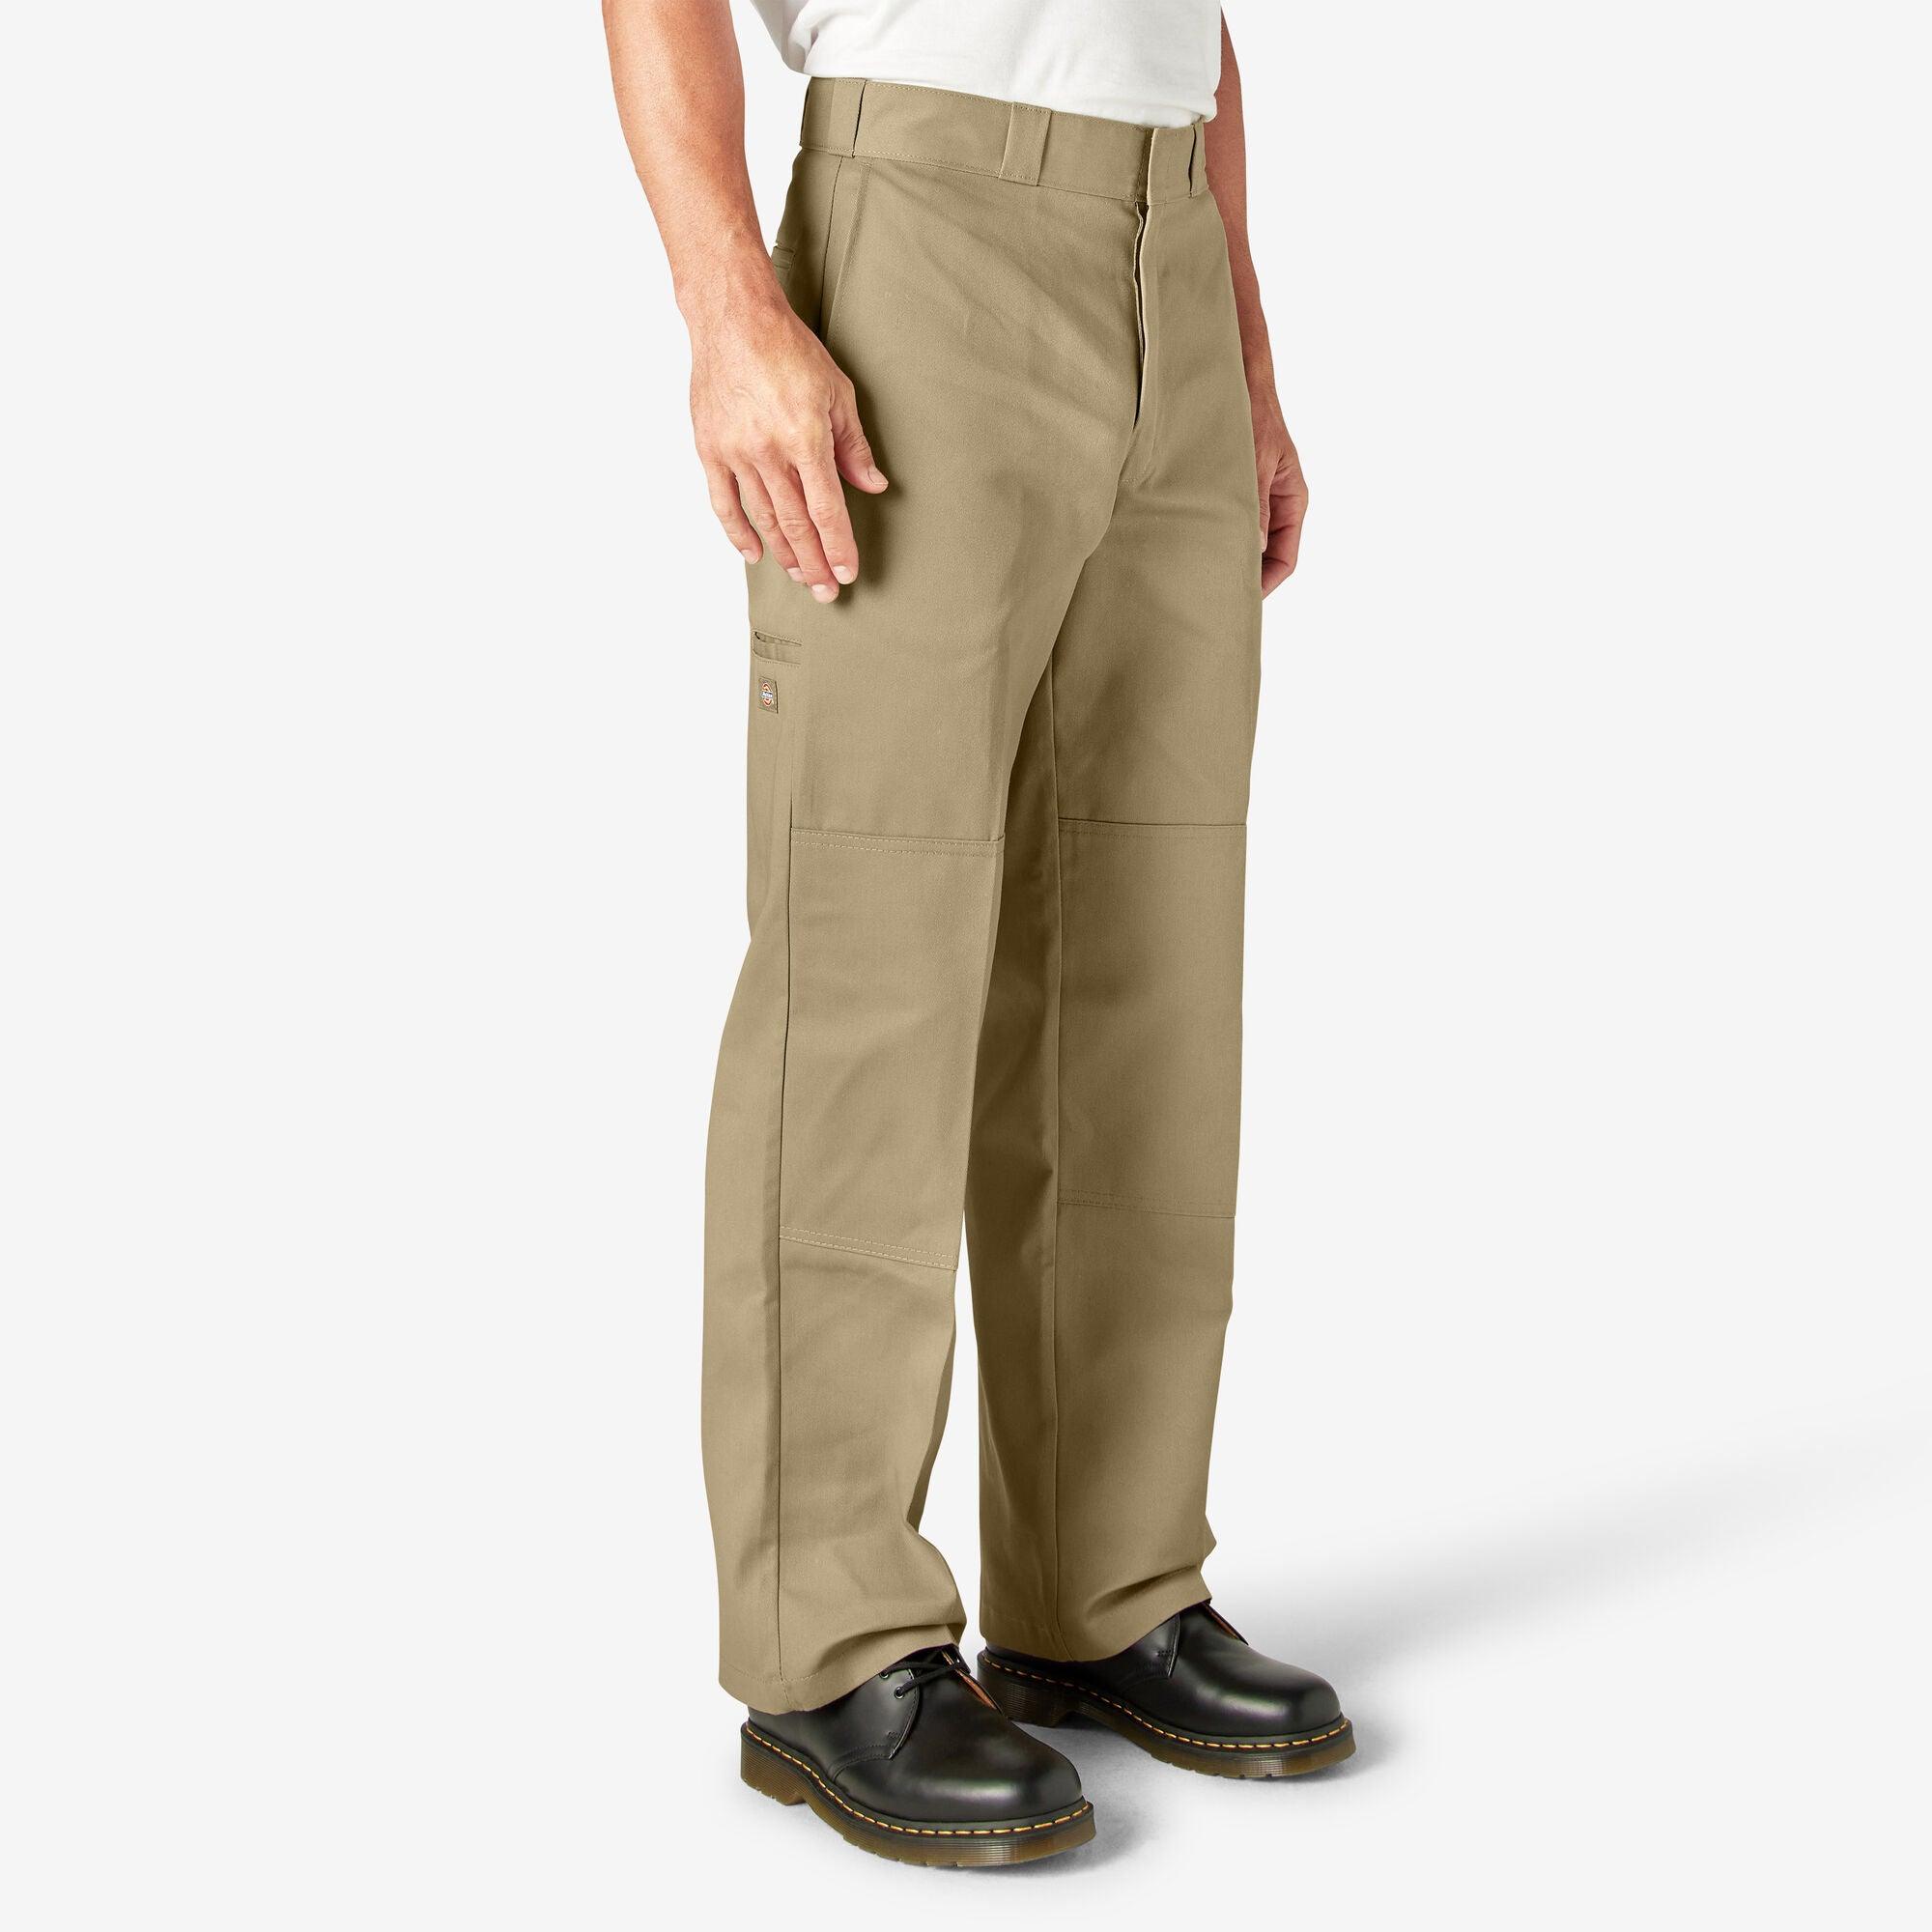 Loose Fit Double Knee Work Pants, Khaki - Purpose-Built / Home of the Trades